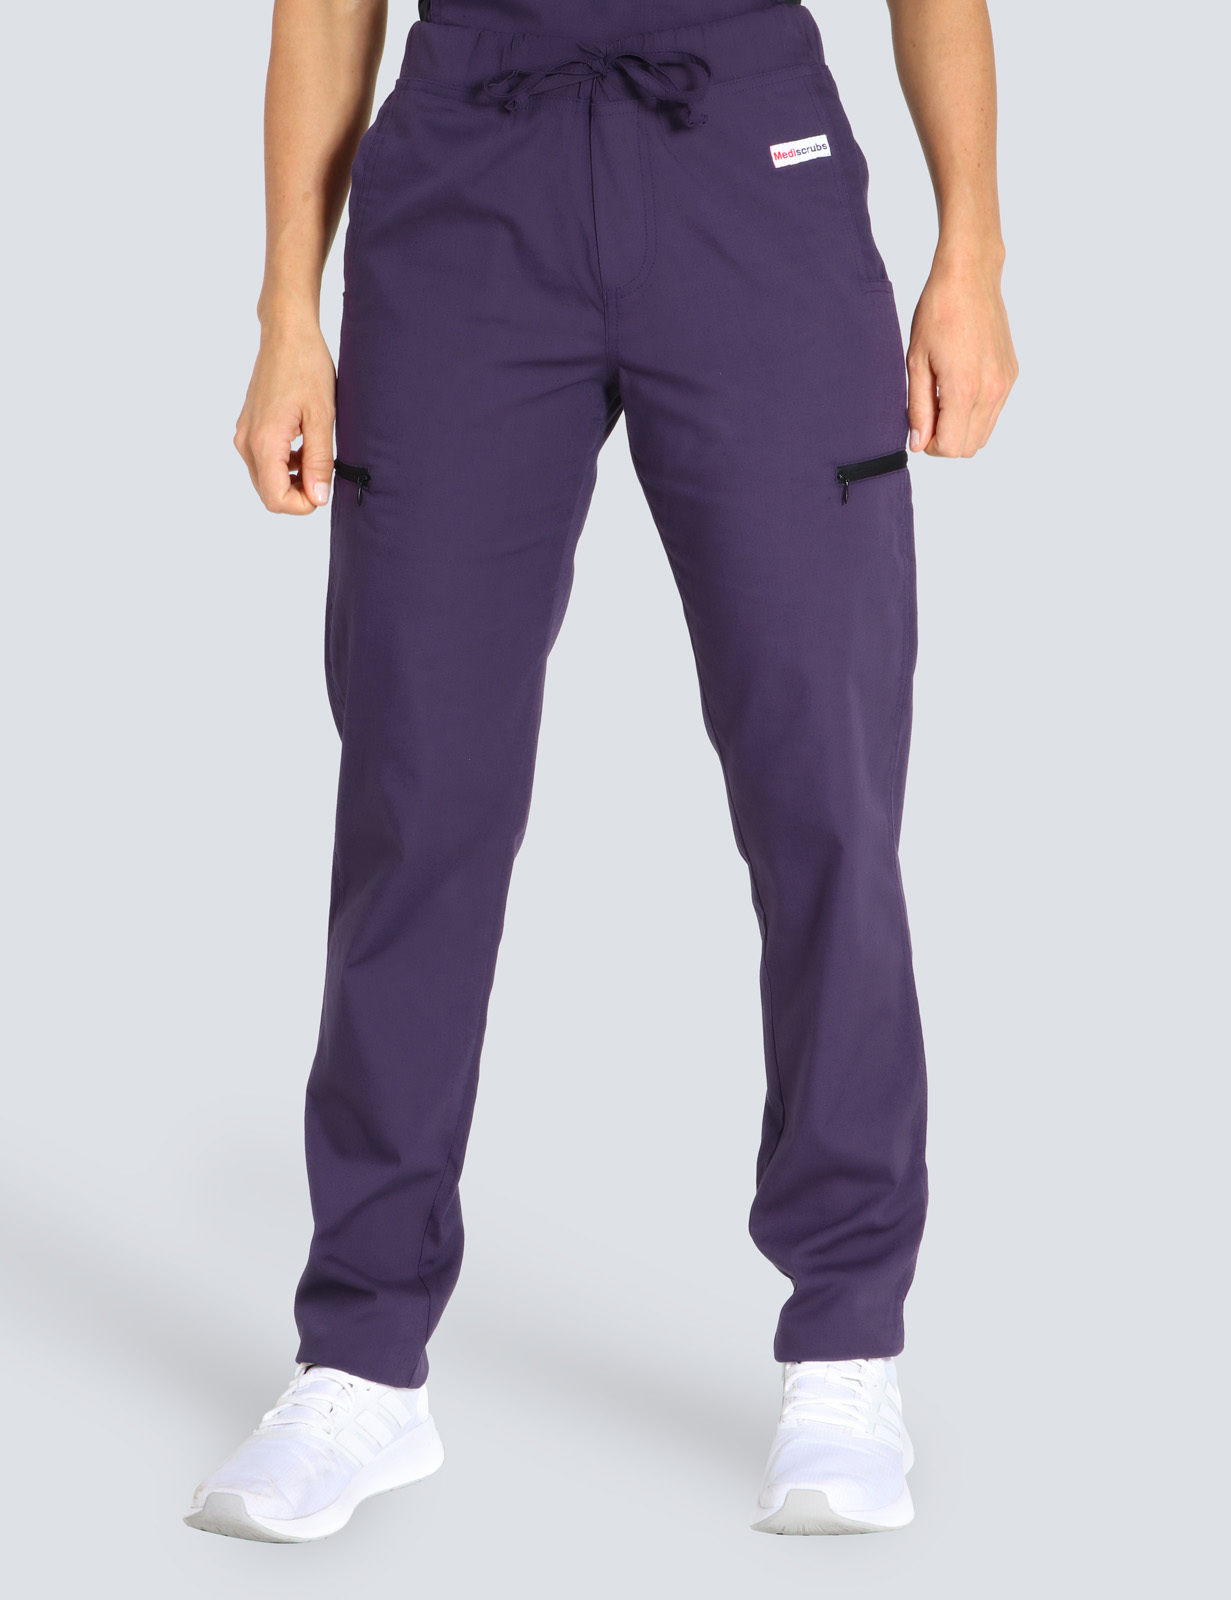 The Park - Centre for Mental Health - Pharmacy Pants only Bundle (Cargo Performance Pants)